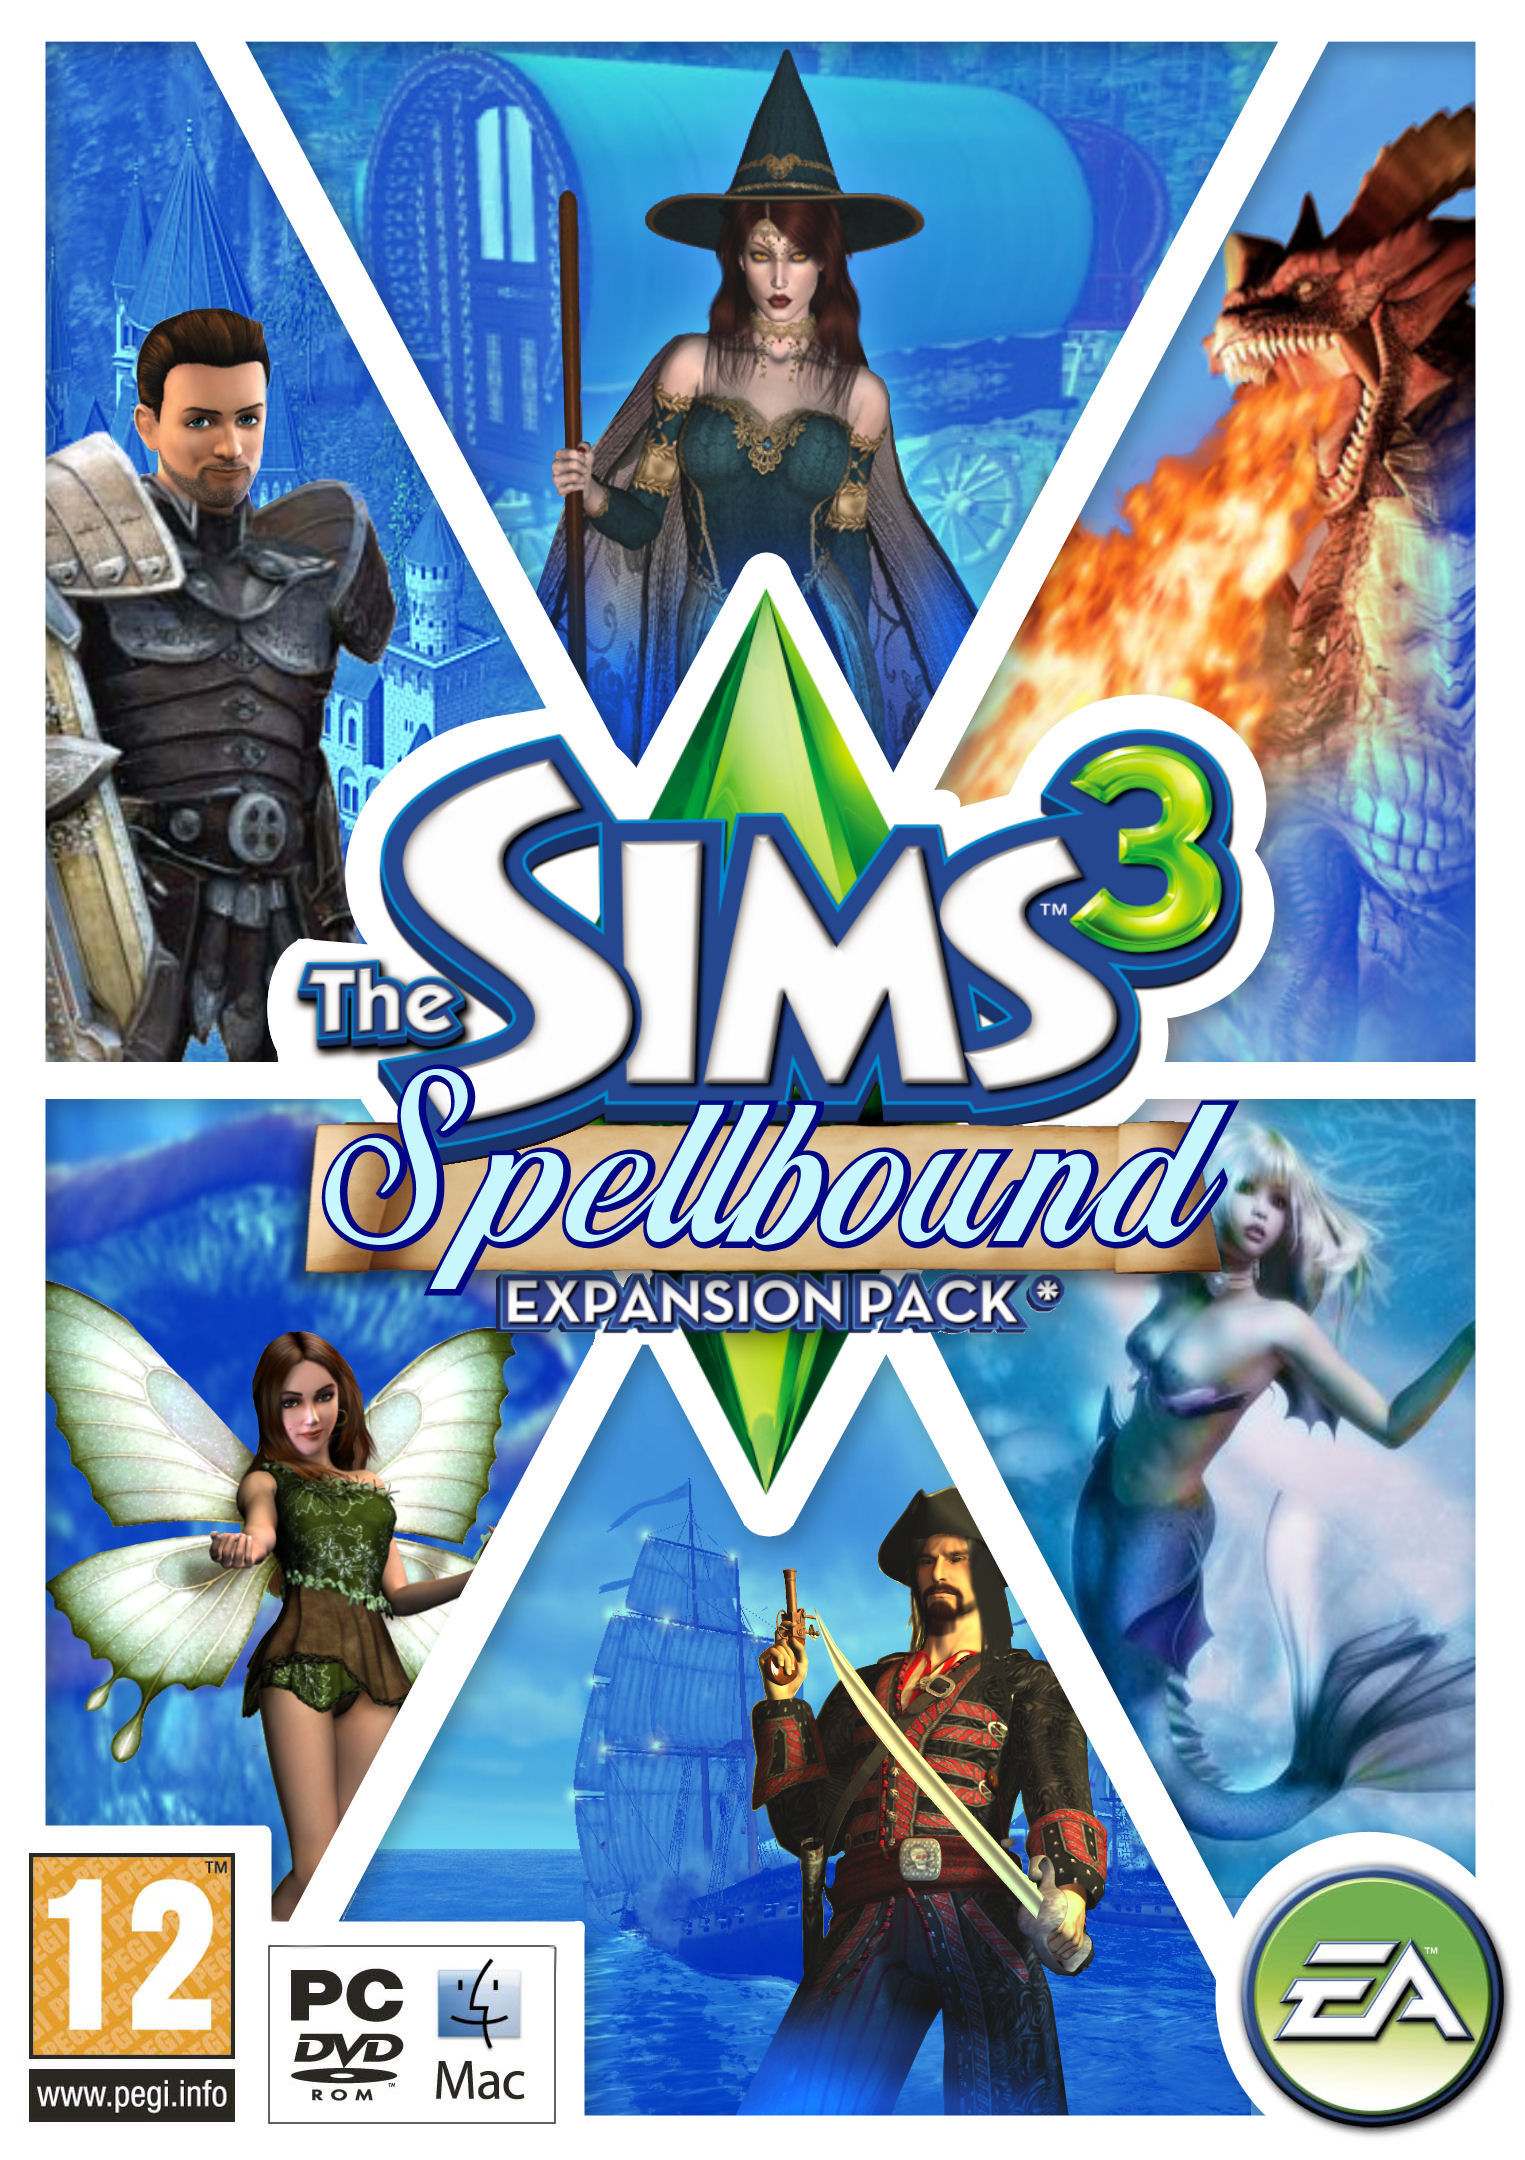 expansion packs for sims 2 free download